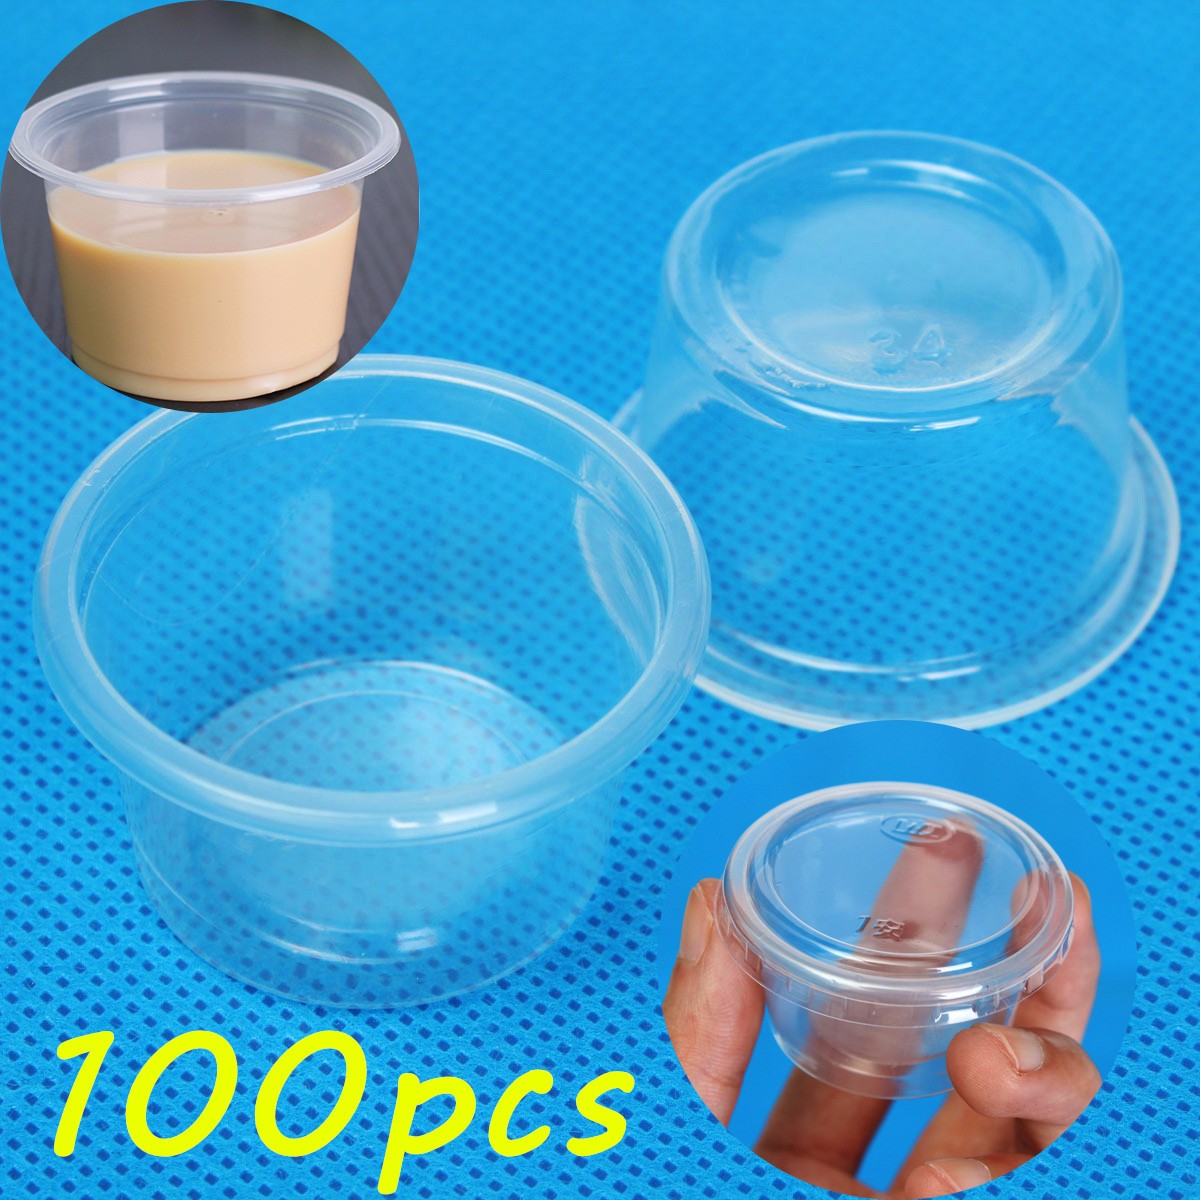 

100pcs 1oz 30ml Cup With Lid Clear Plastic Pudding Jelly Sauce Cup